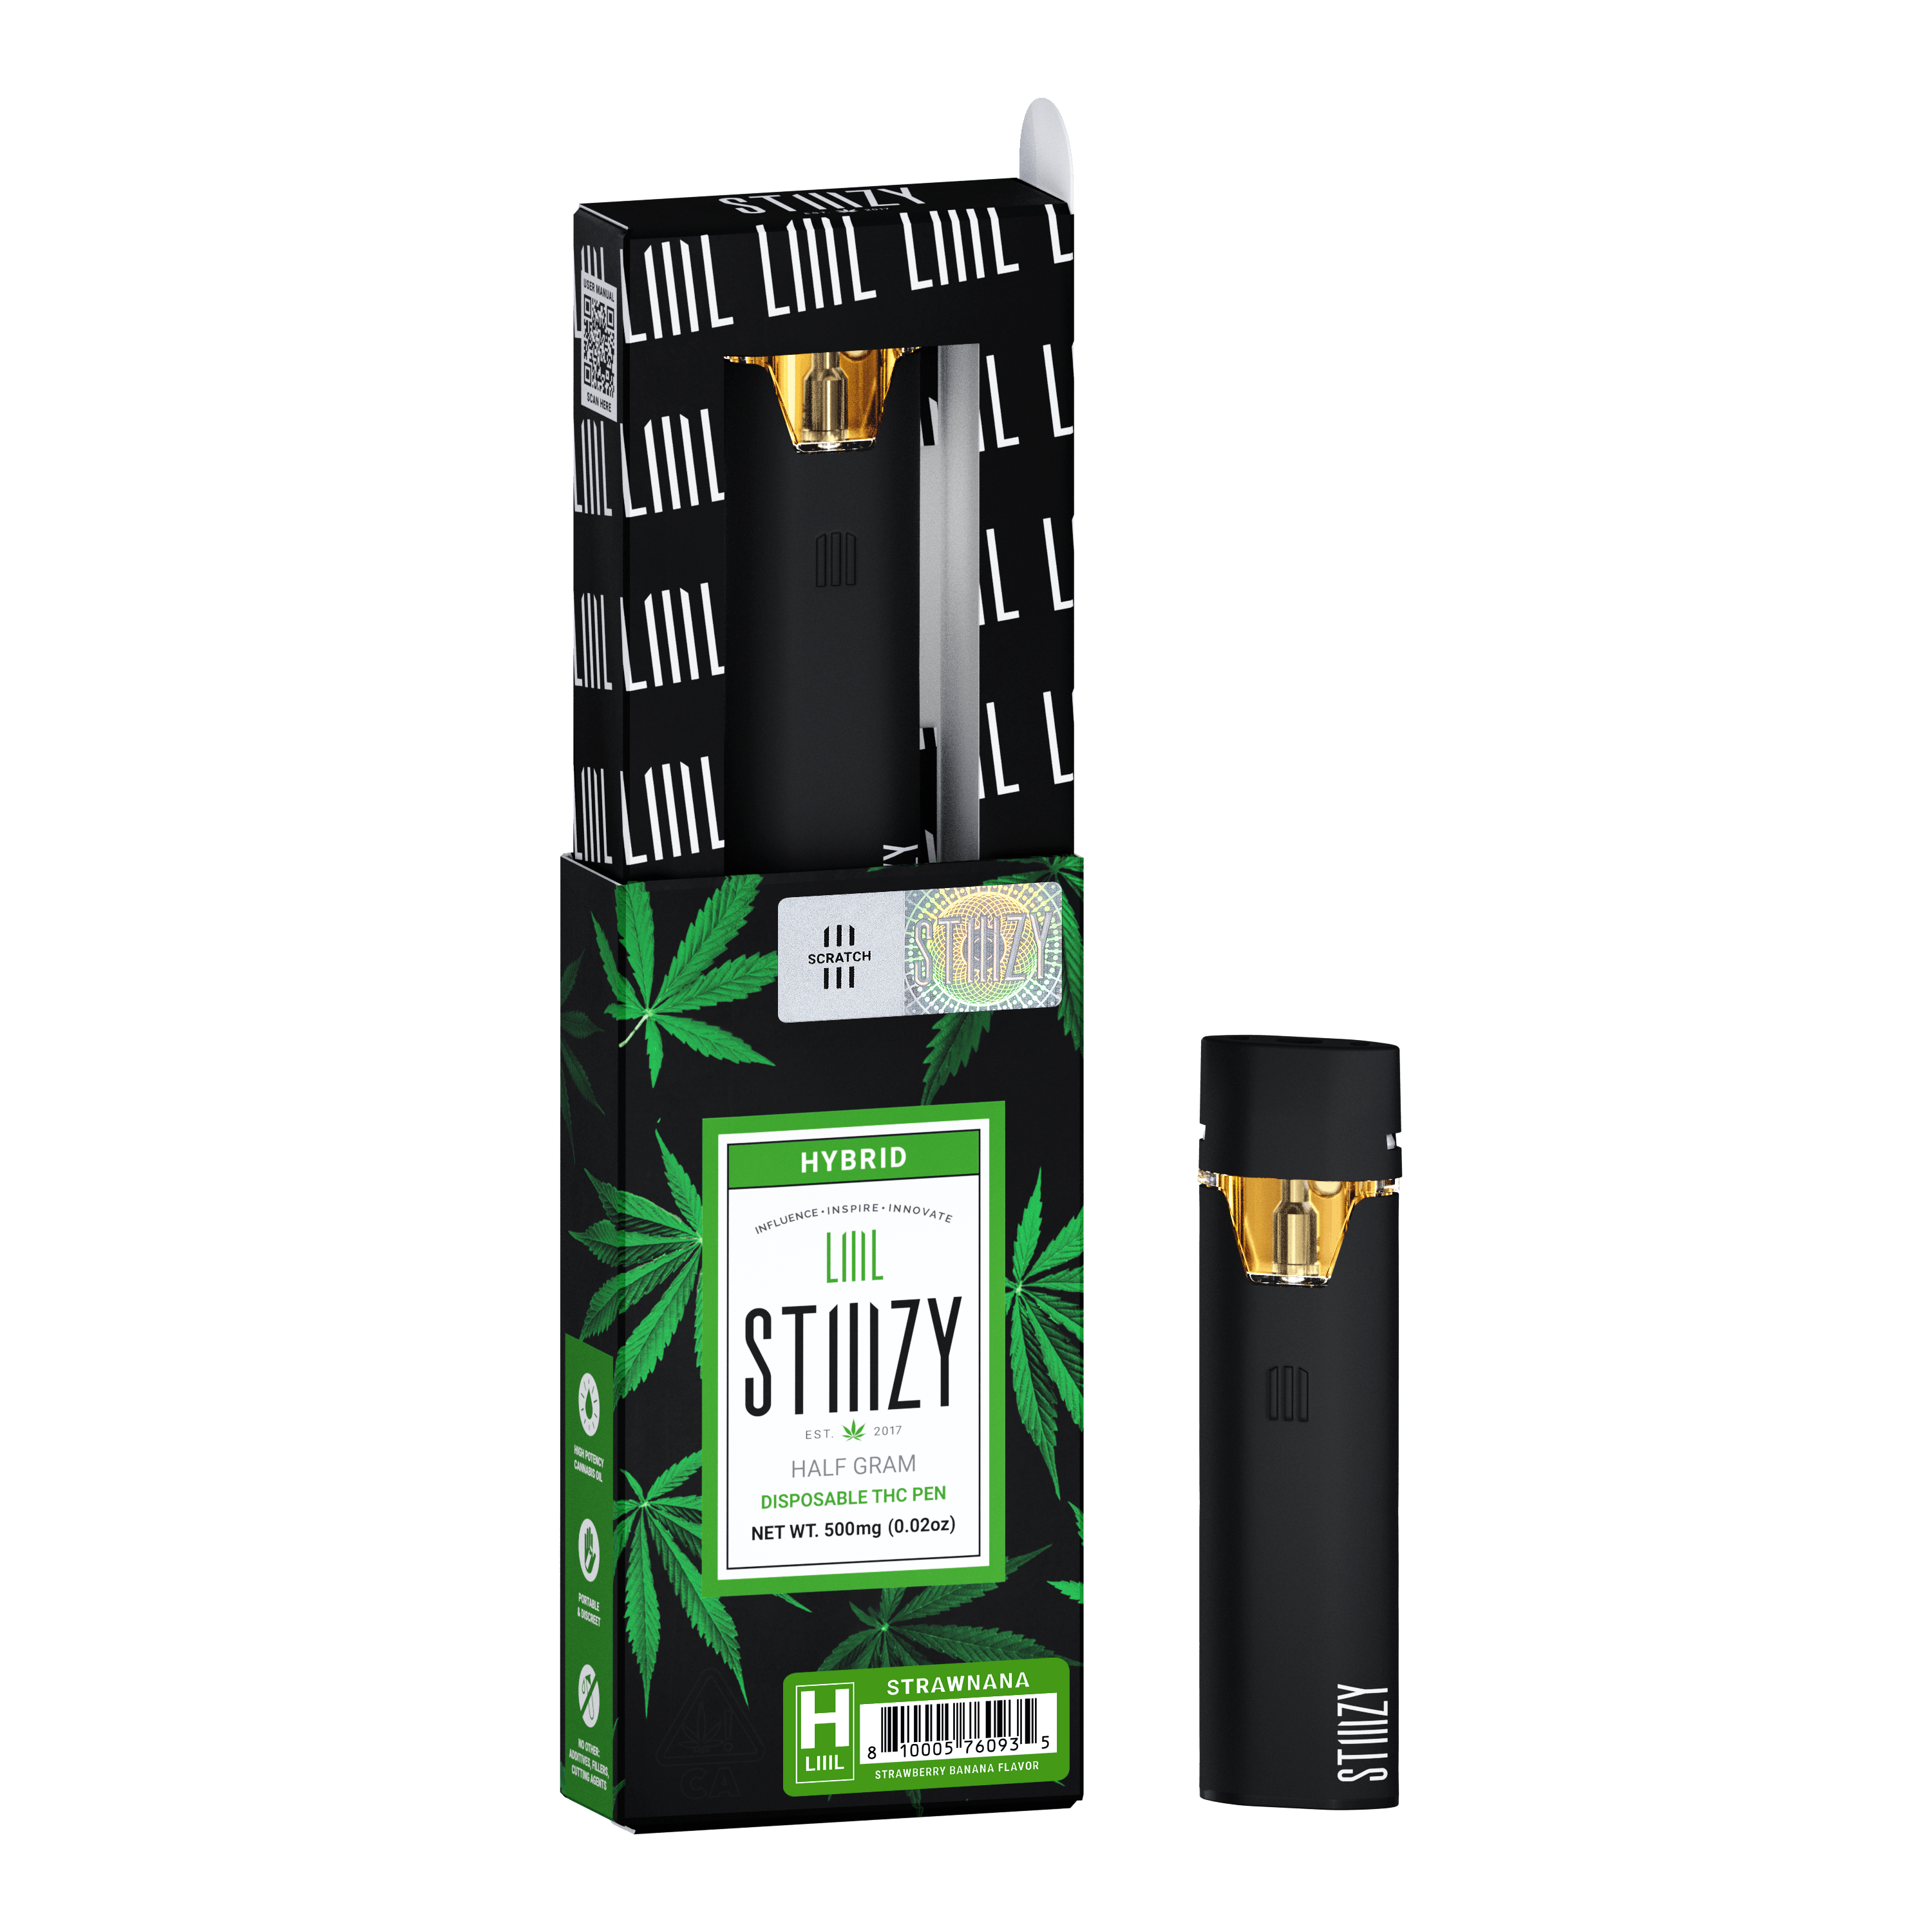 Disposable weed pens with cannabis oil derived from the Strawnana weed strain are inside and outside of their box.